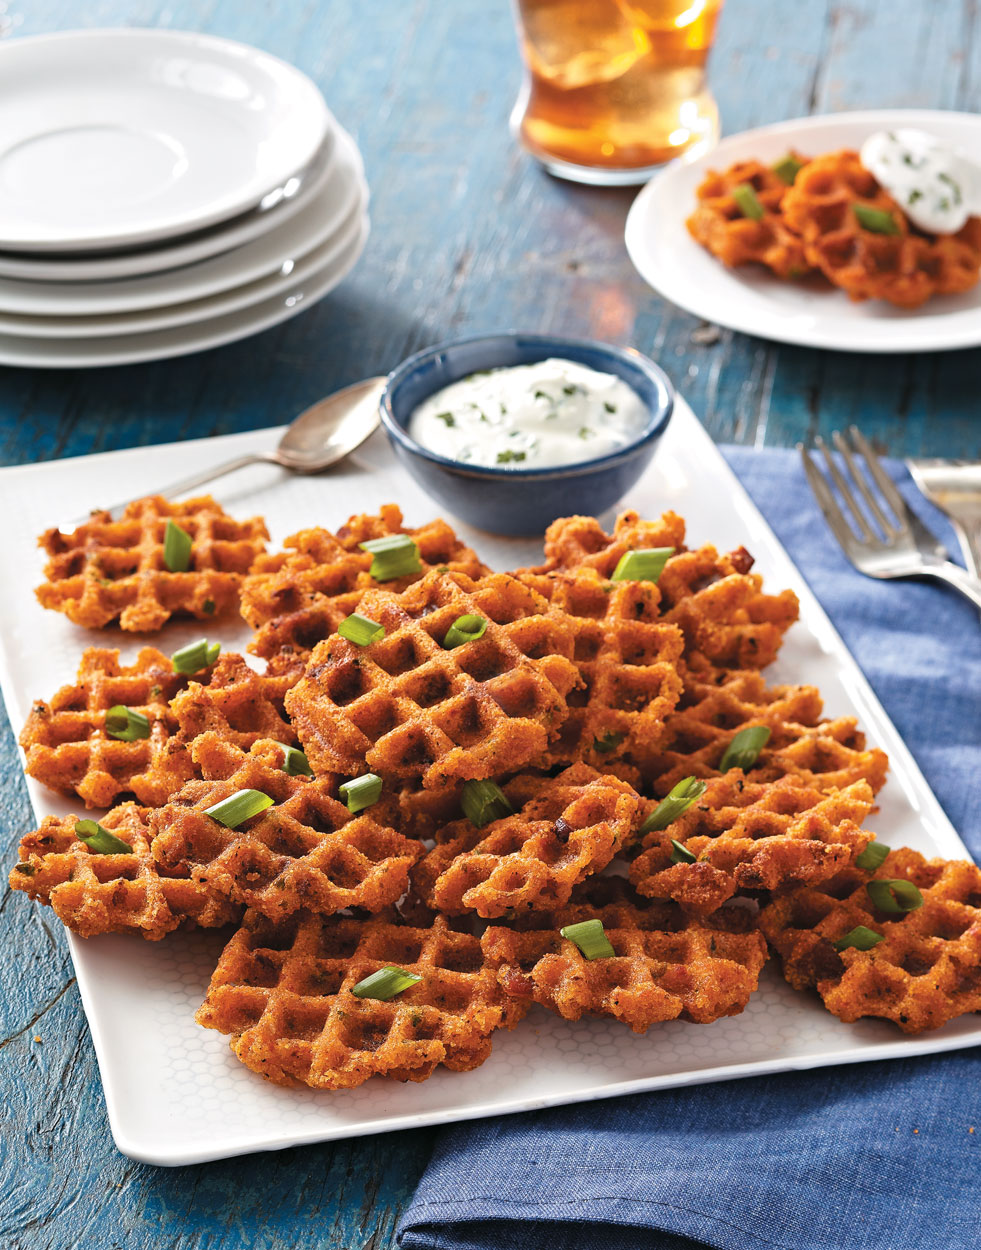 Savory Corn Waffles with Spiced Bacon